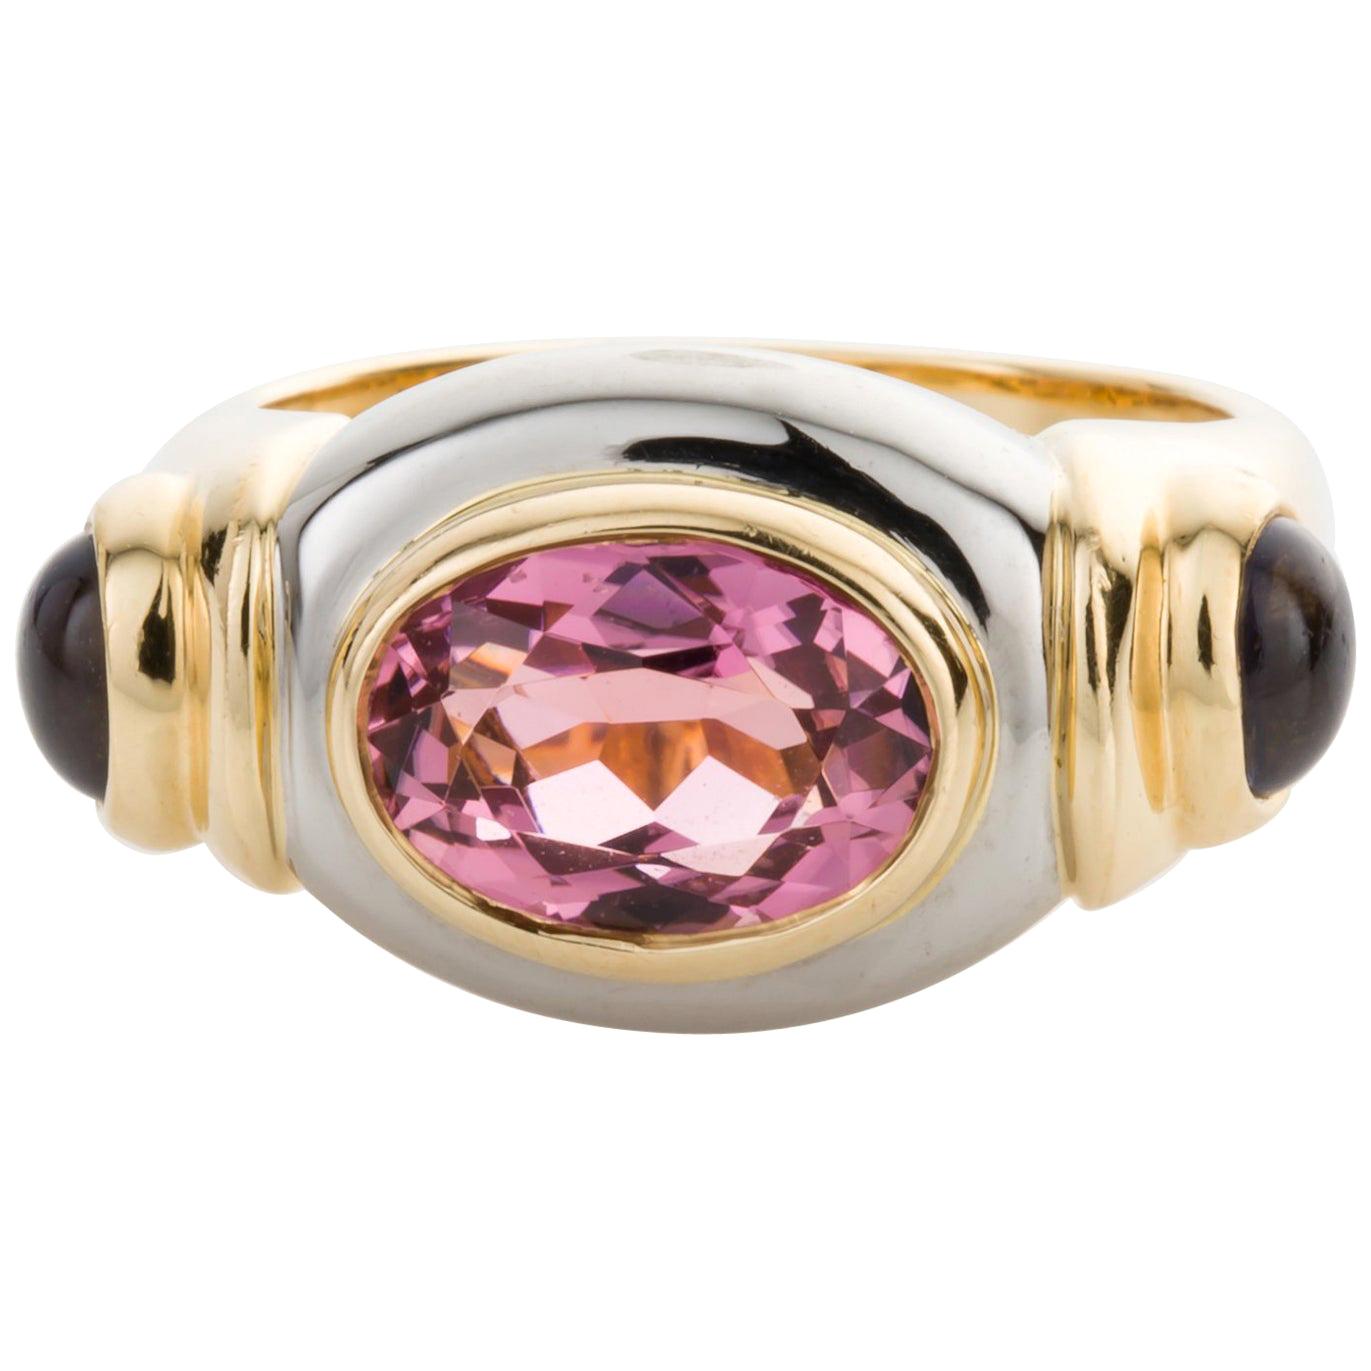 Torres Pink Tourmaline and Iolite 18 Karat White and Yellow Gold Dress Ring For Sale